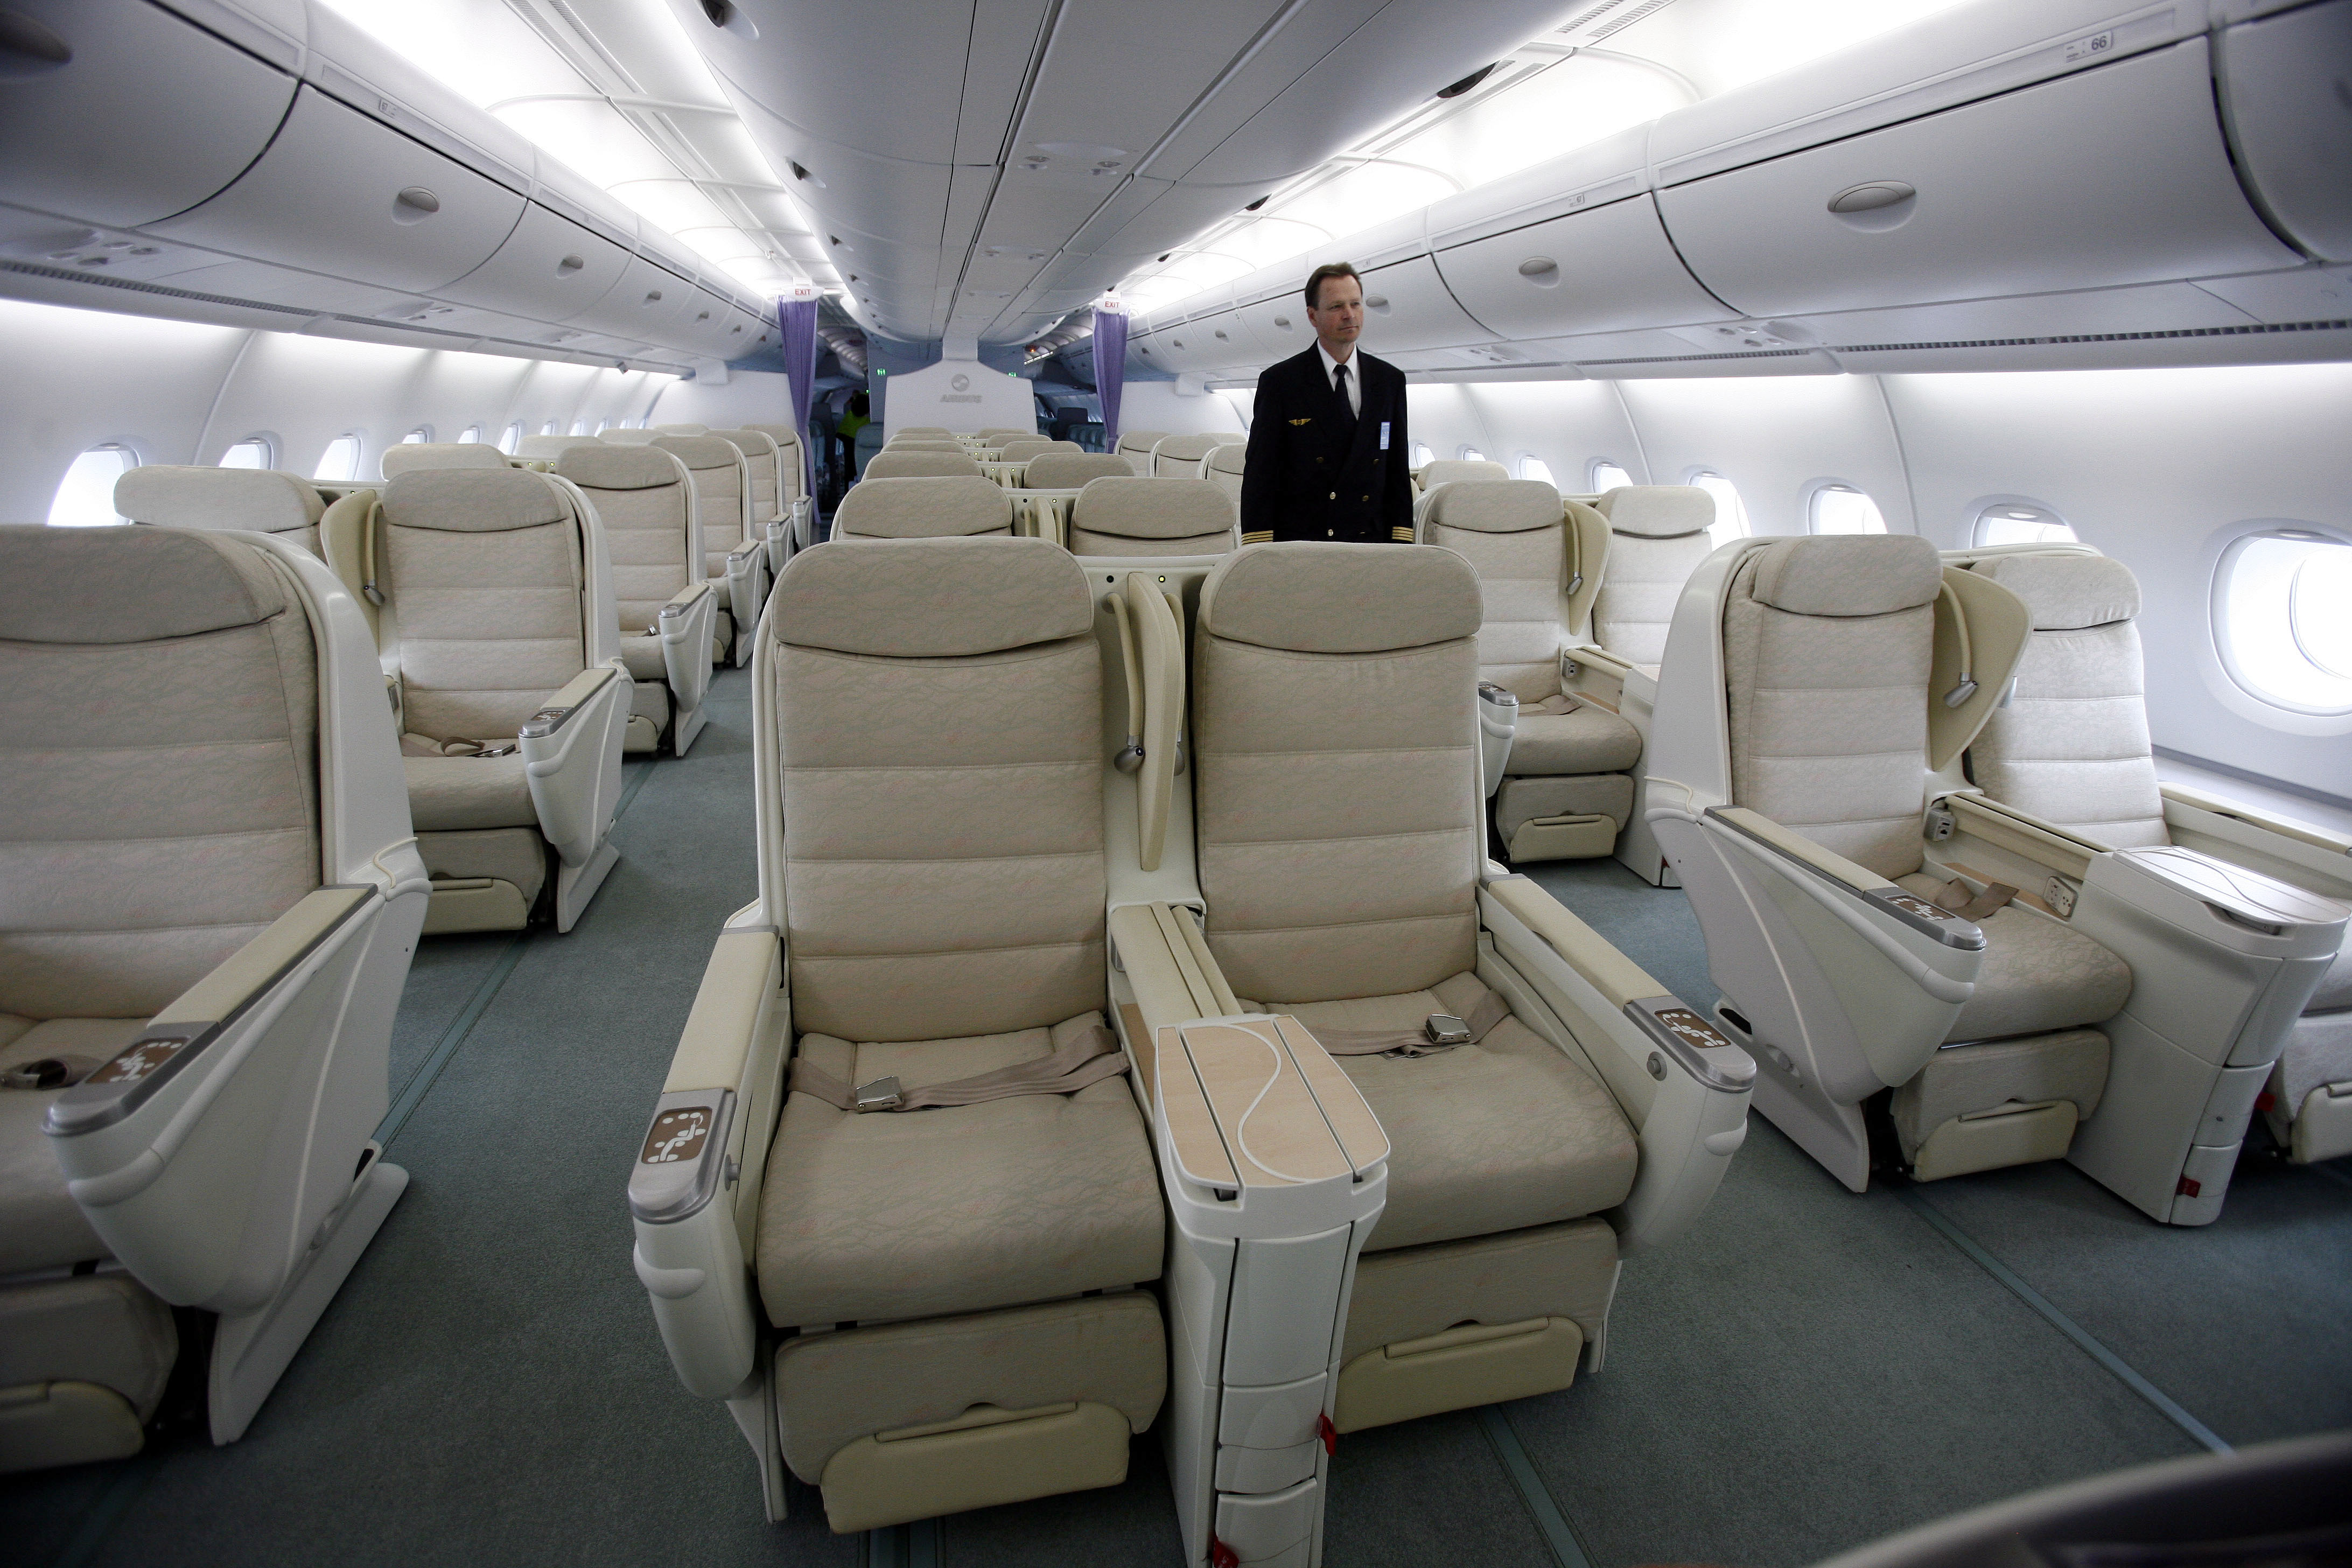 View of business class seating inside the Airbus A380 at JFK International Airport in New York